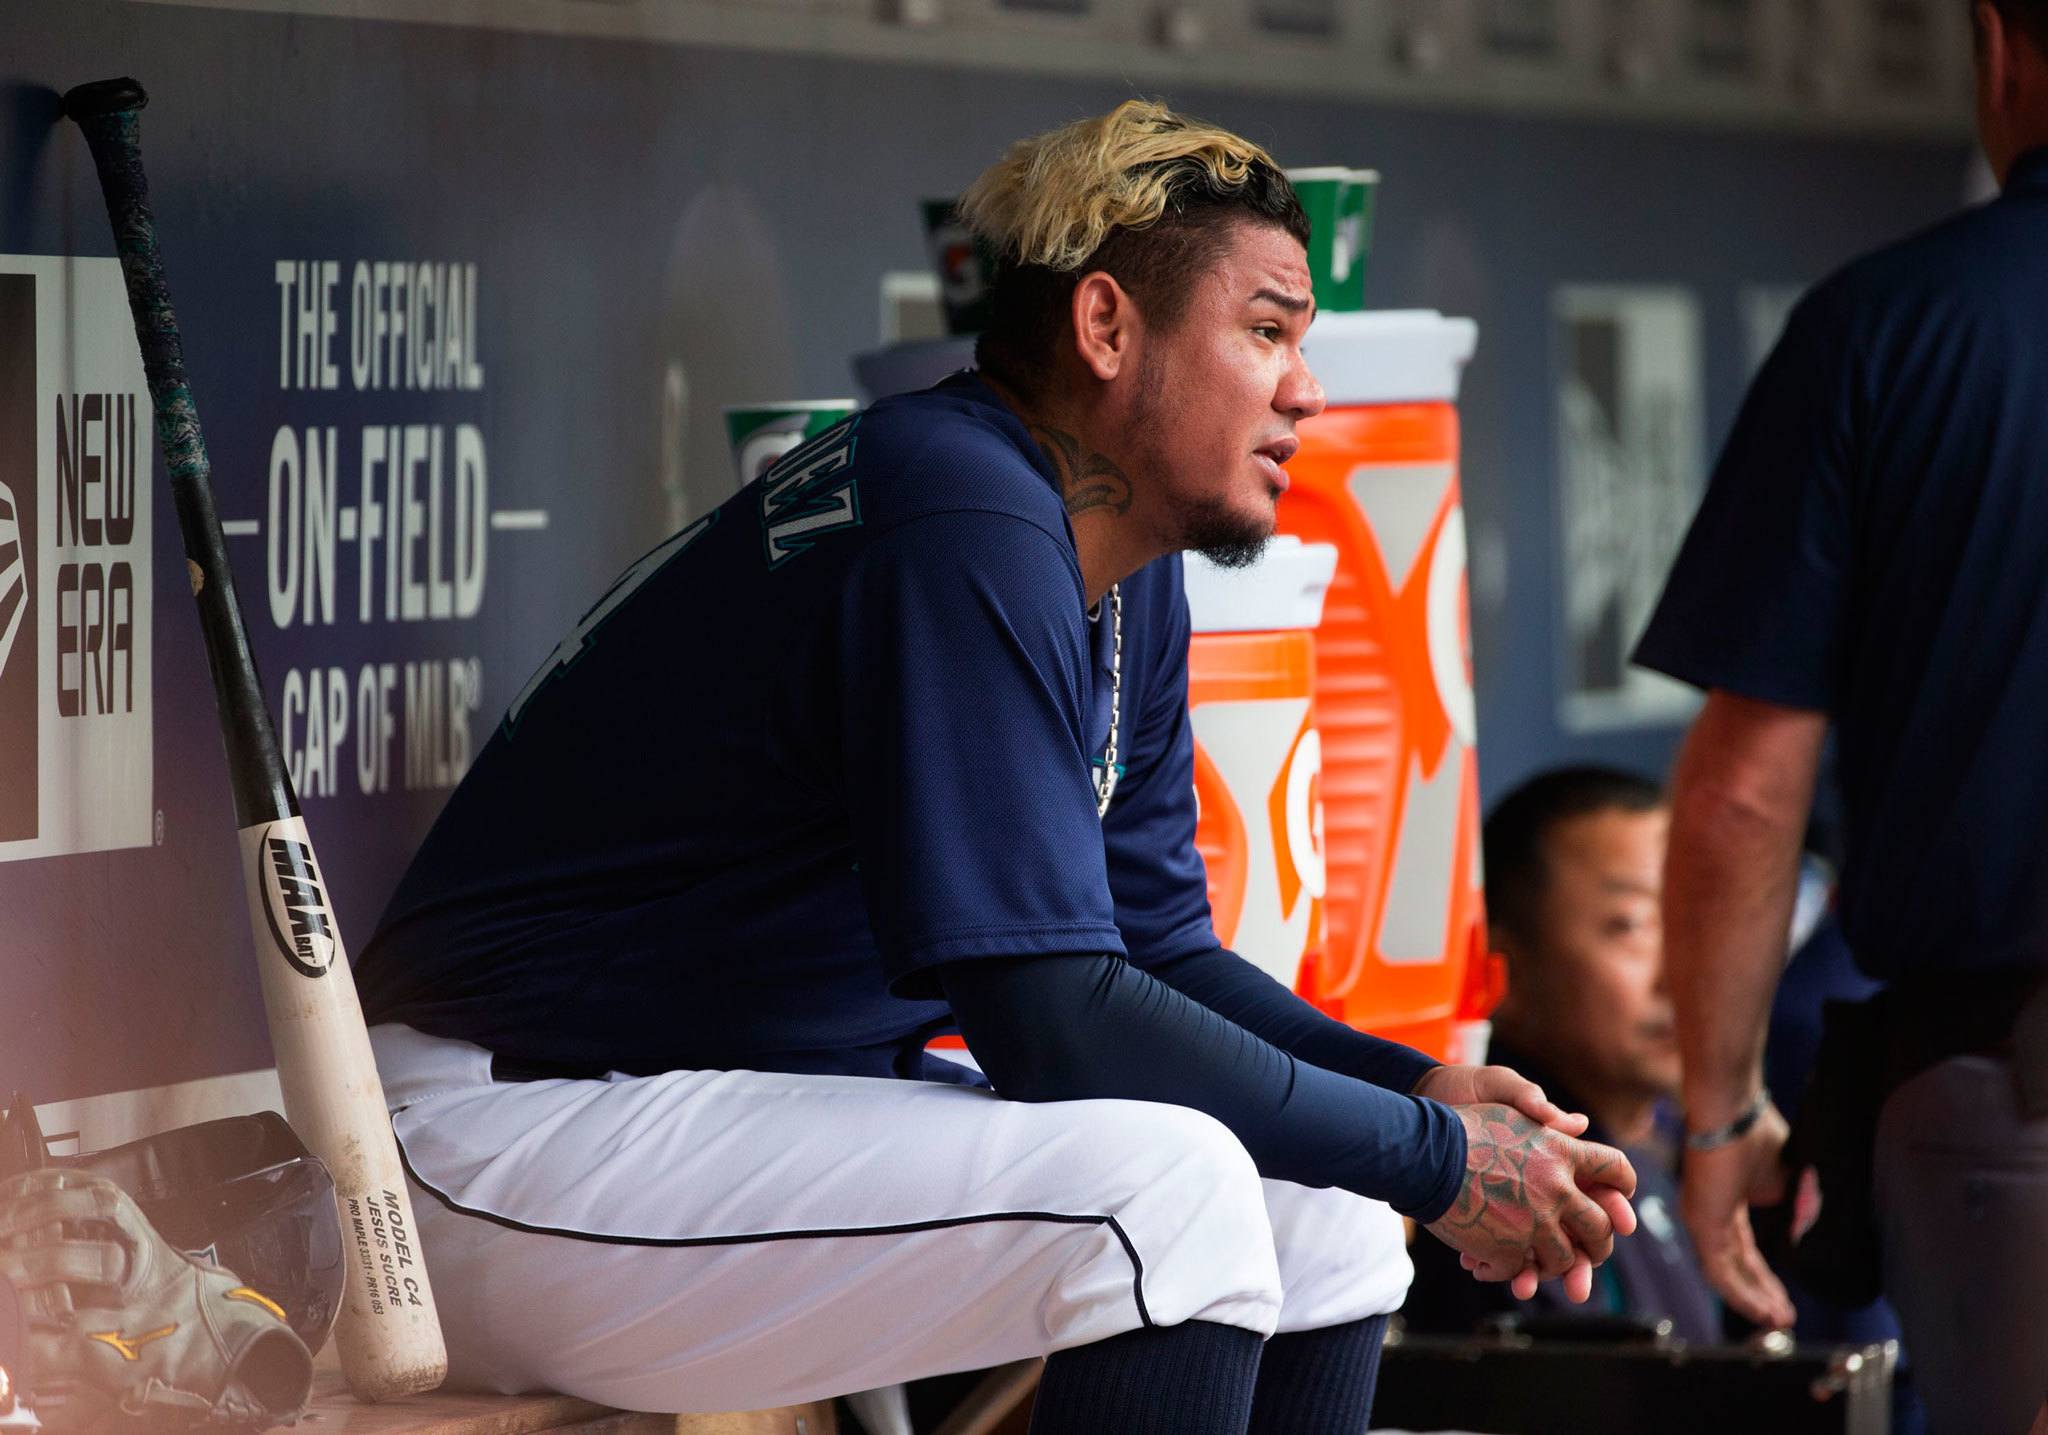 (Lindsey Wasson | The Seattle Times) Seattle Mariners starting pitcher Felix Hernandez sits in the dugout after a game last season at Safeco Field. Hernandez is eager to prove his critics wrong that his health is good and his game is just as strong as in years’ past.